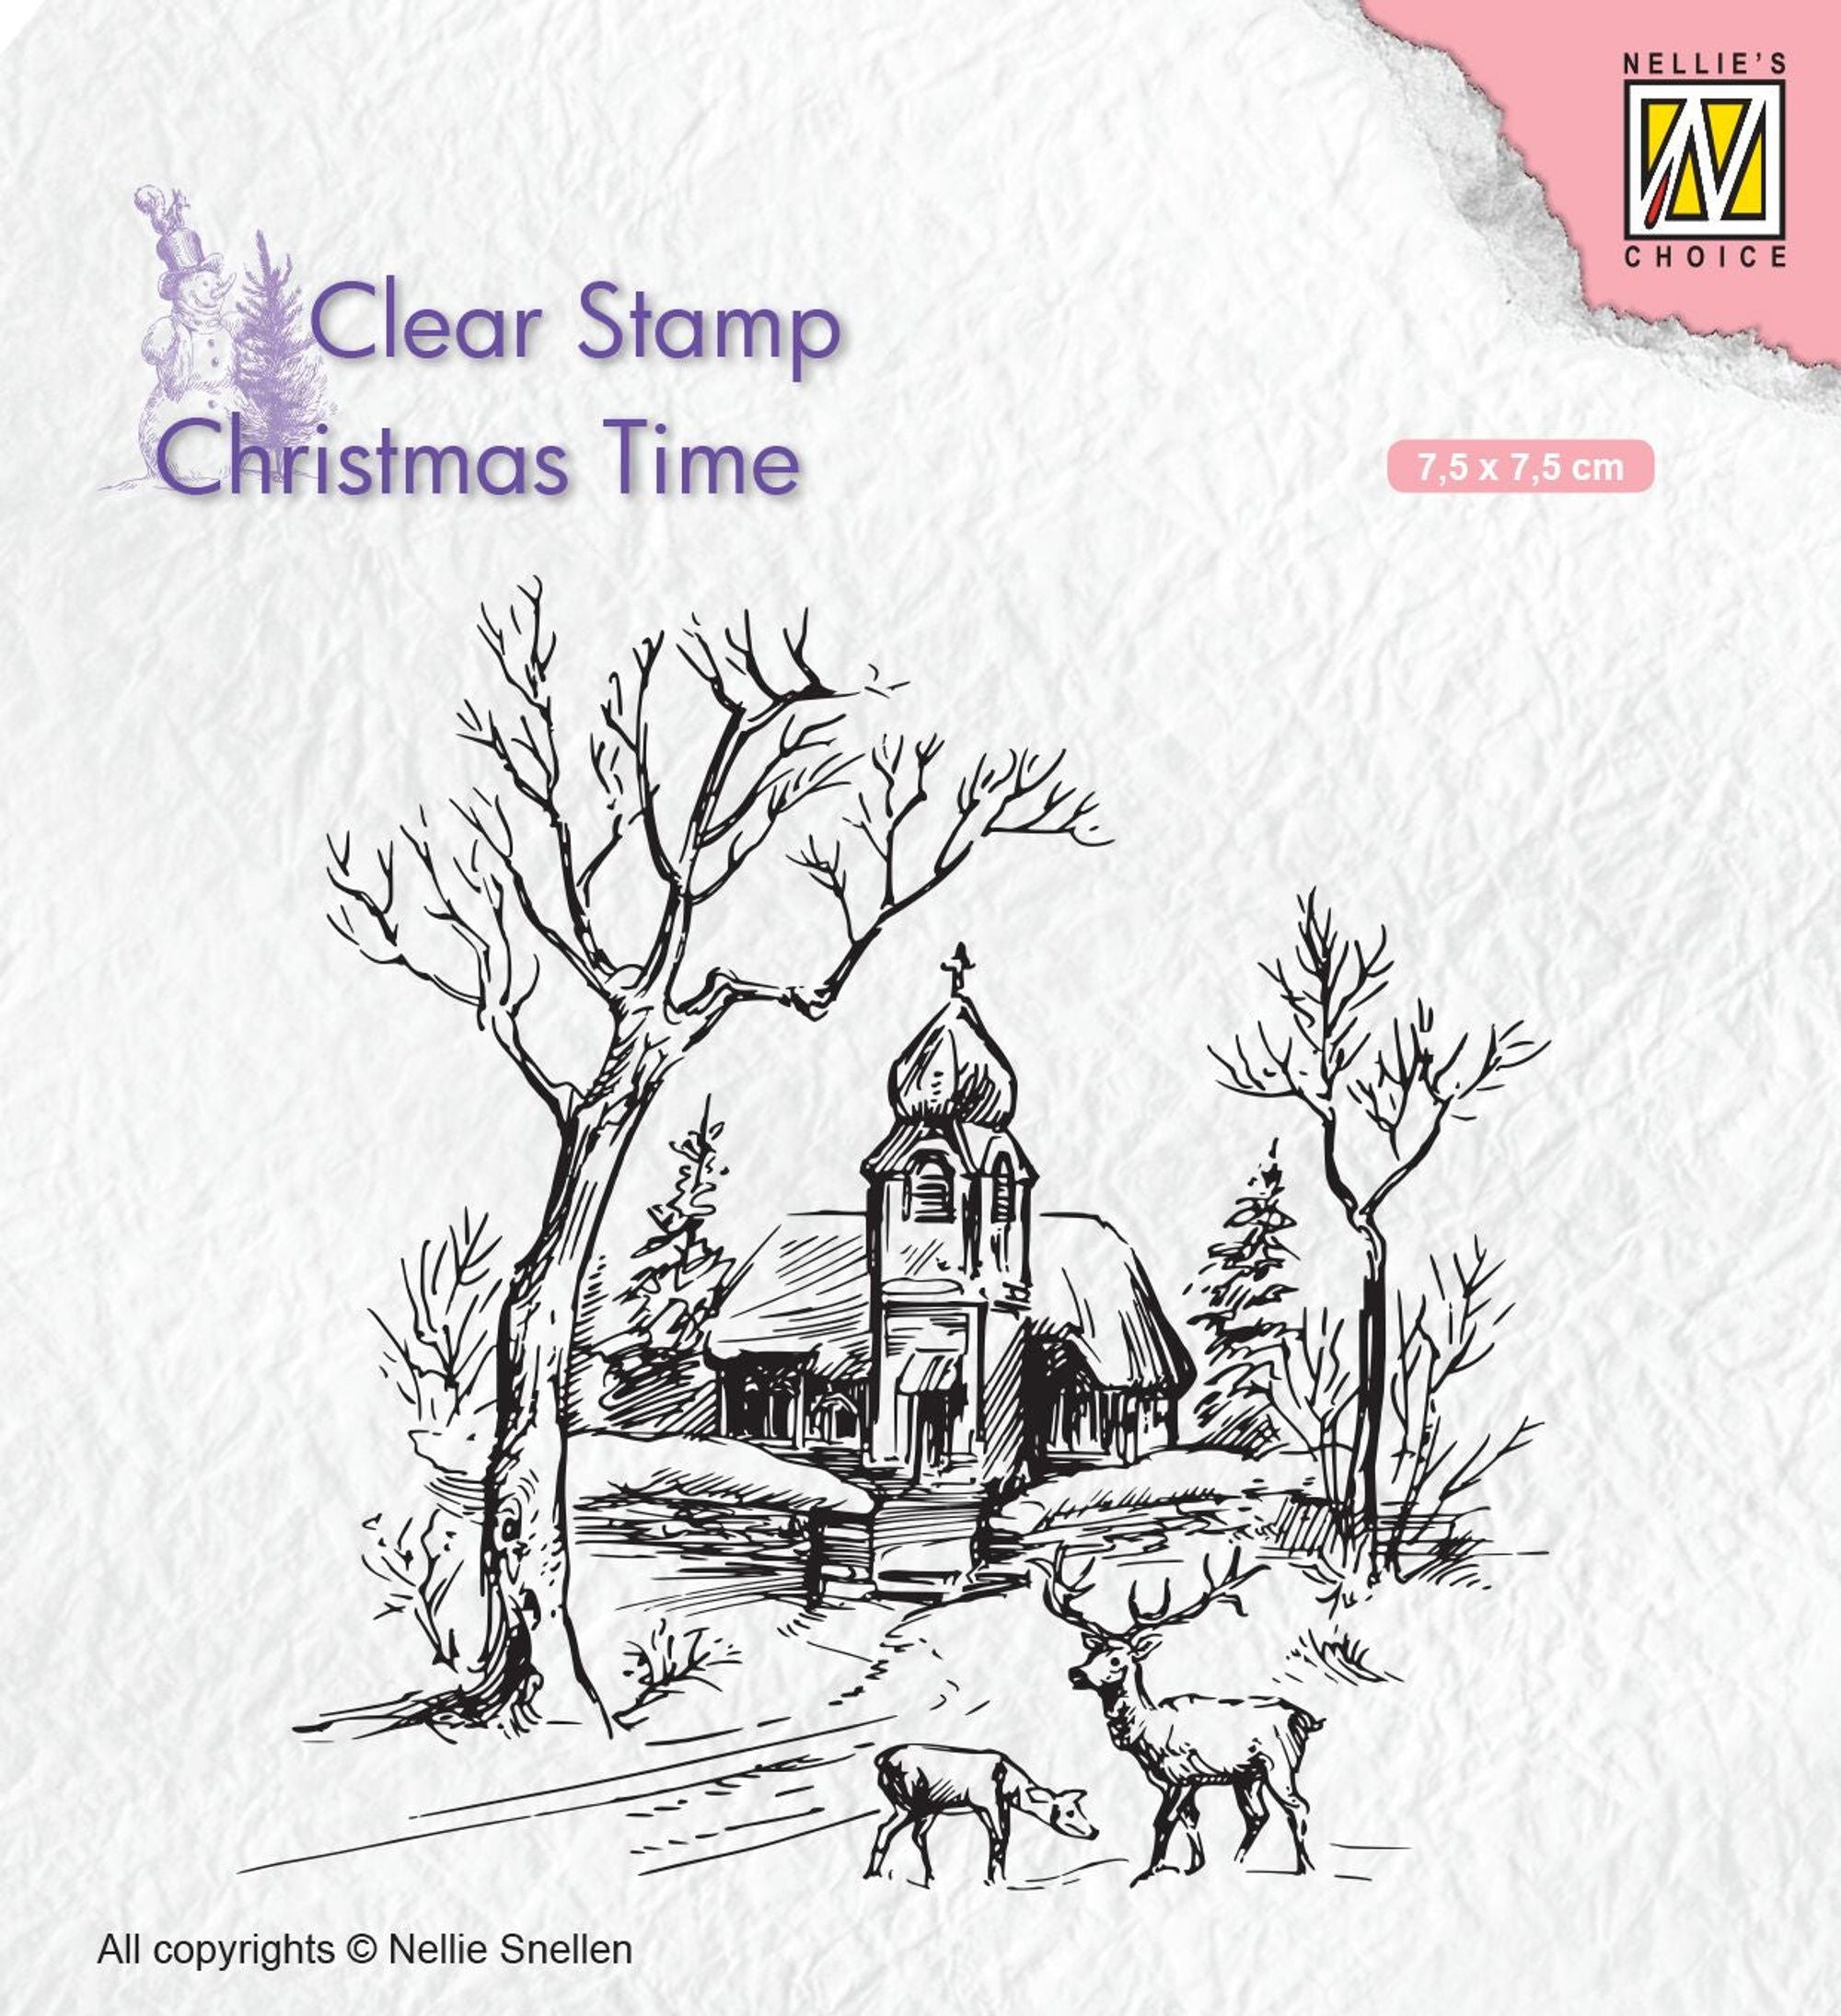 Nellie's Choice Clear Stamp Church and Deer